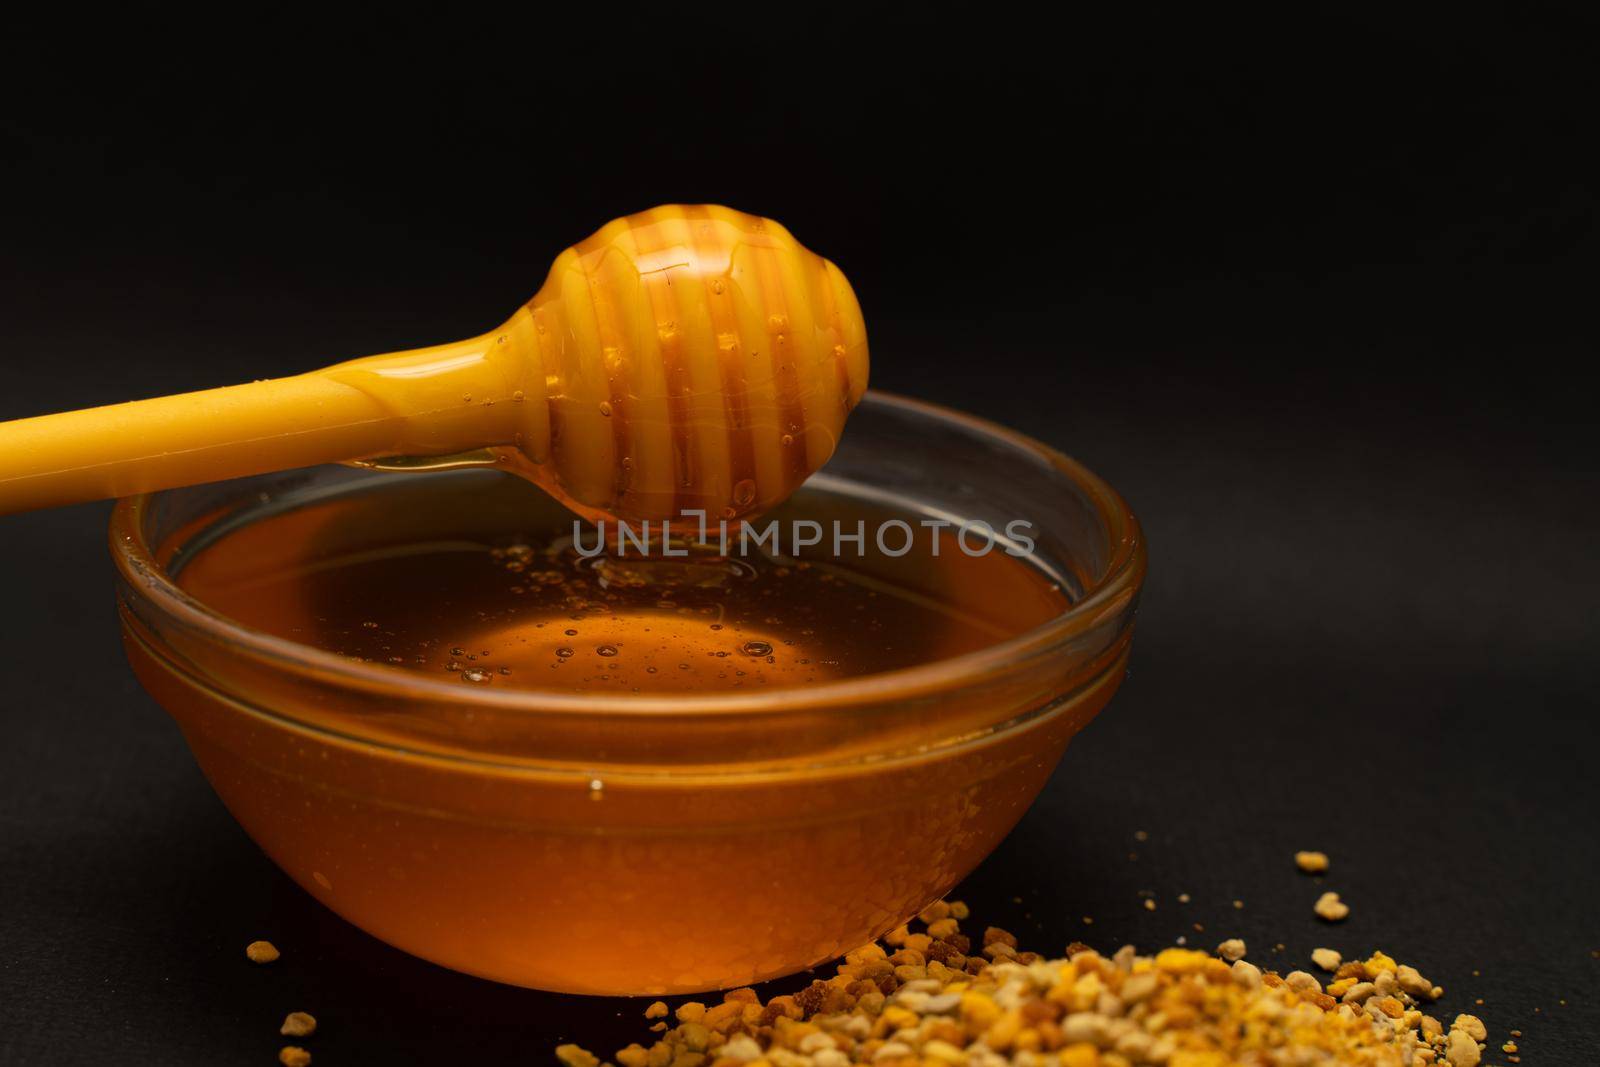 A yellow spoon of honey dipped in a jar of honey and bee bread scattered on a black background. Honey dripping around, nice and inviting photos. Healthy food concept